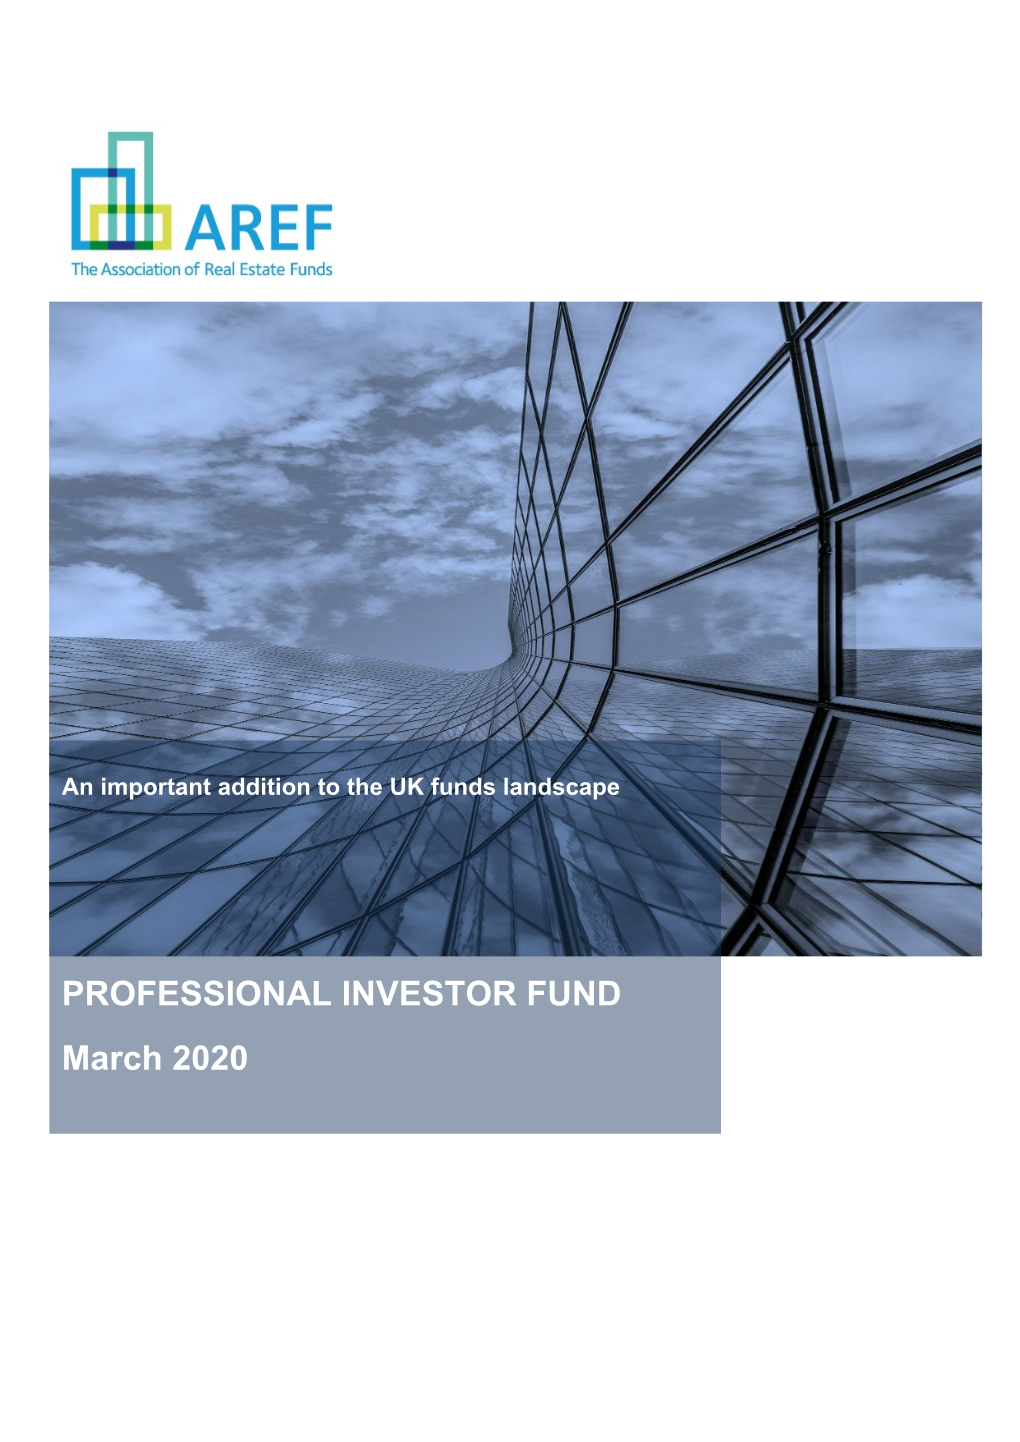 PROFESSIONAL INVESTOR FUND March 2020 EXECUTIVE SUMMARY